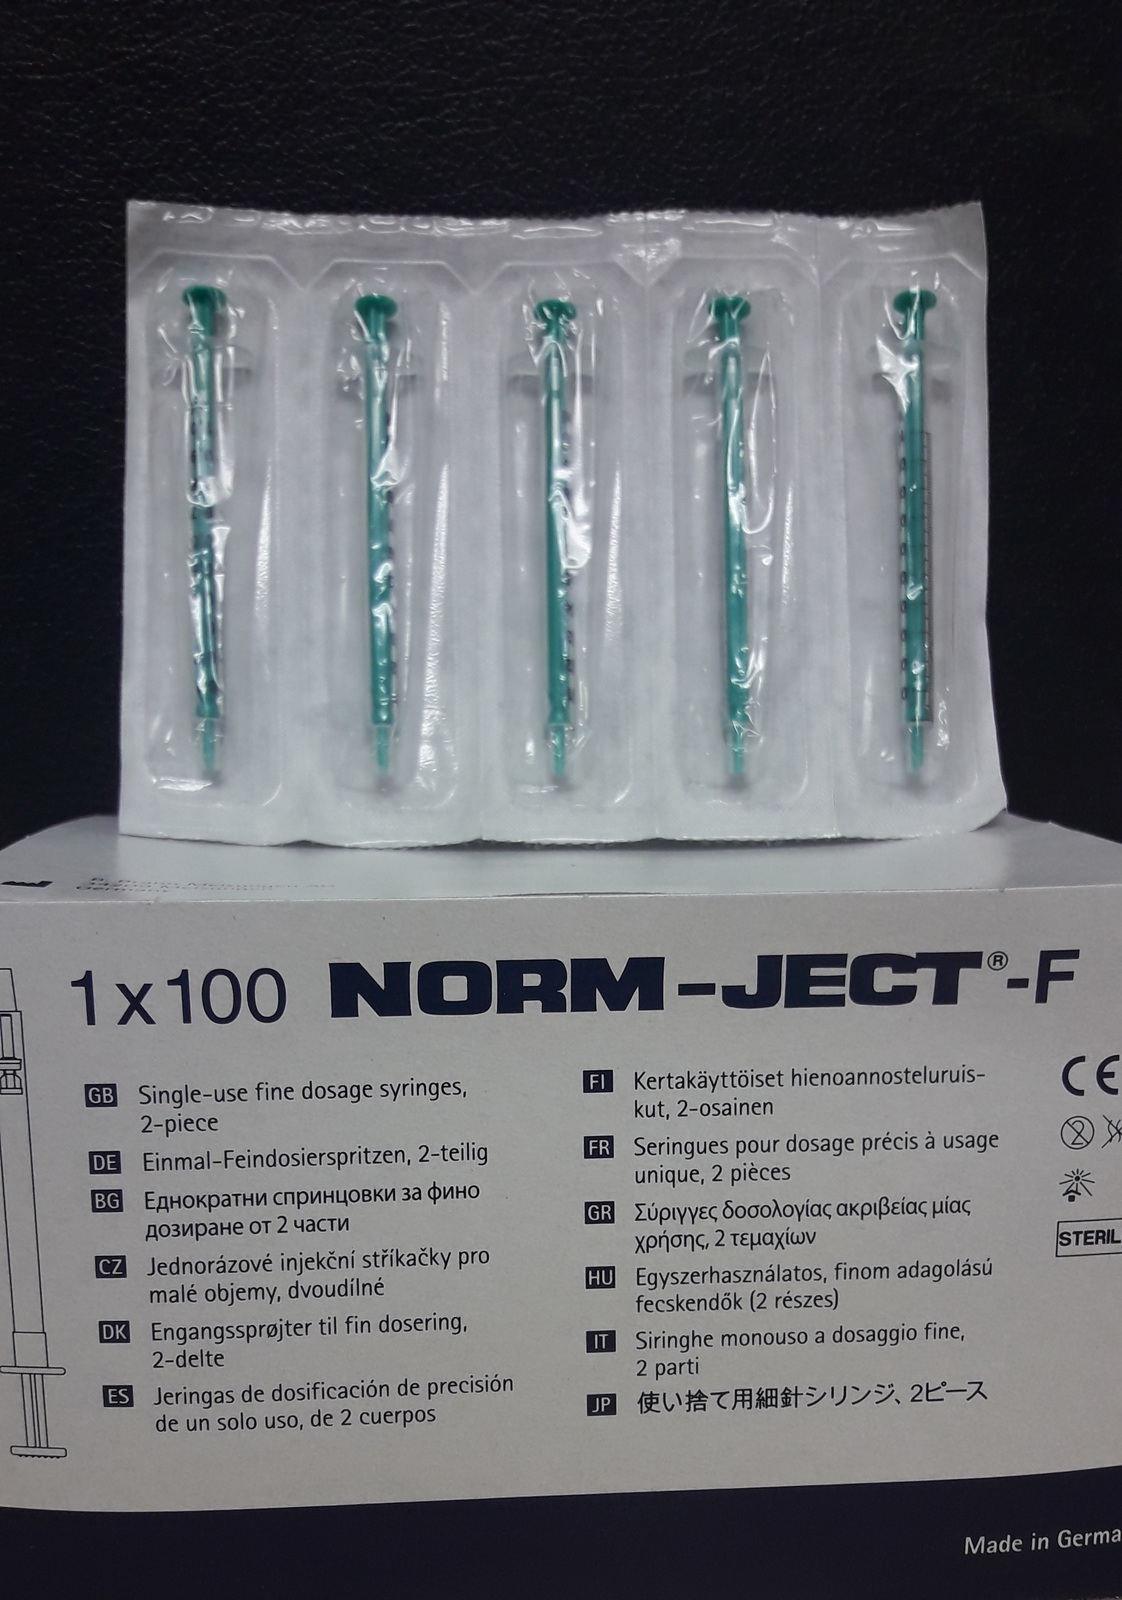 Norm-Ject Plastic Syringe, Luer Slip, 1mL, PK 100 by Norm-Ject